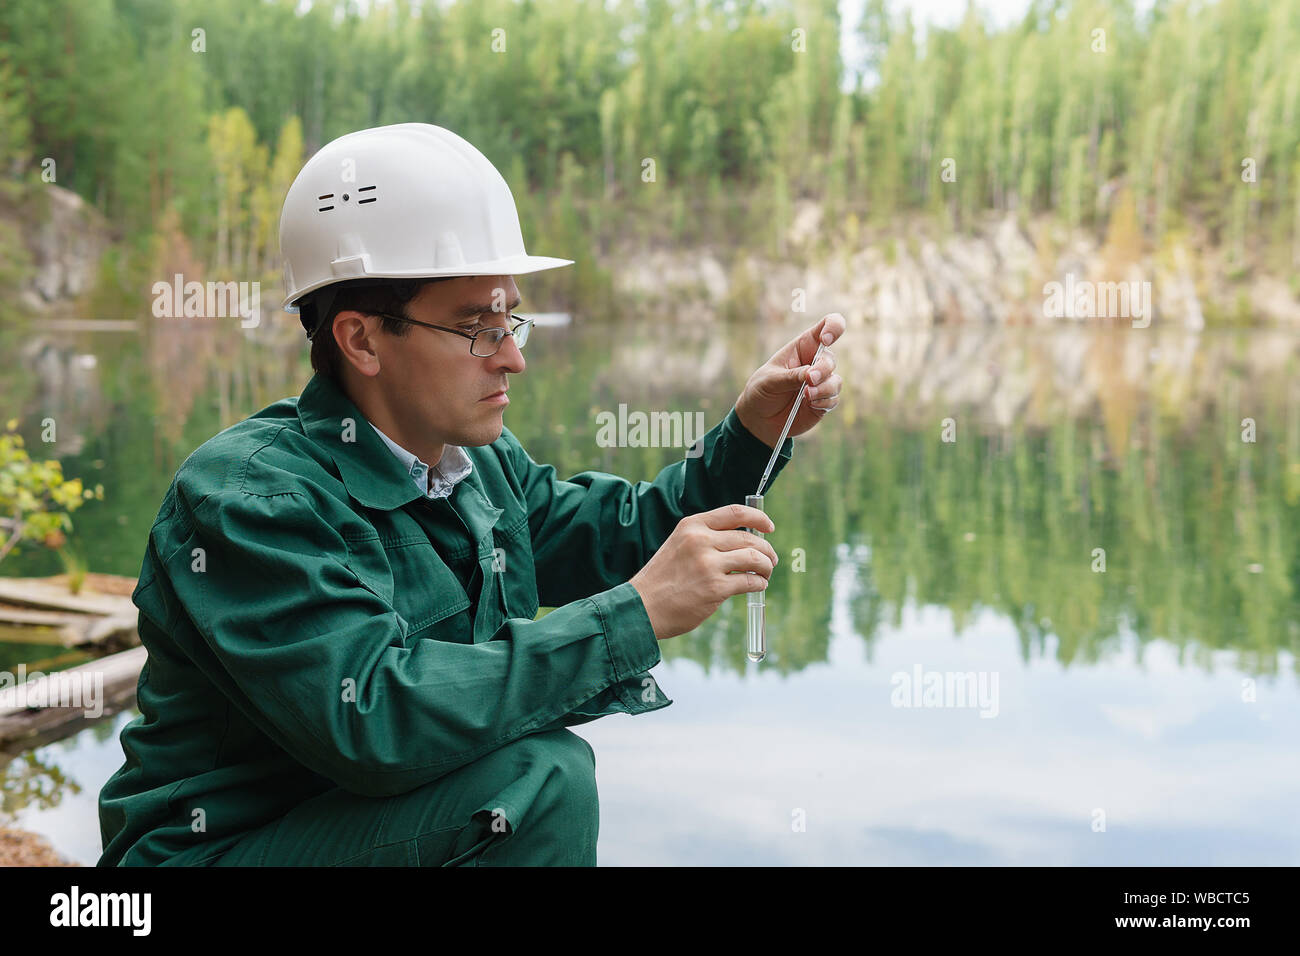 industrial ecologist or chemist takes a sample of water from lake at the site of a flooded mining pit Stock Photo